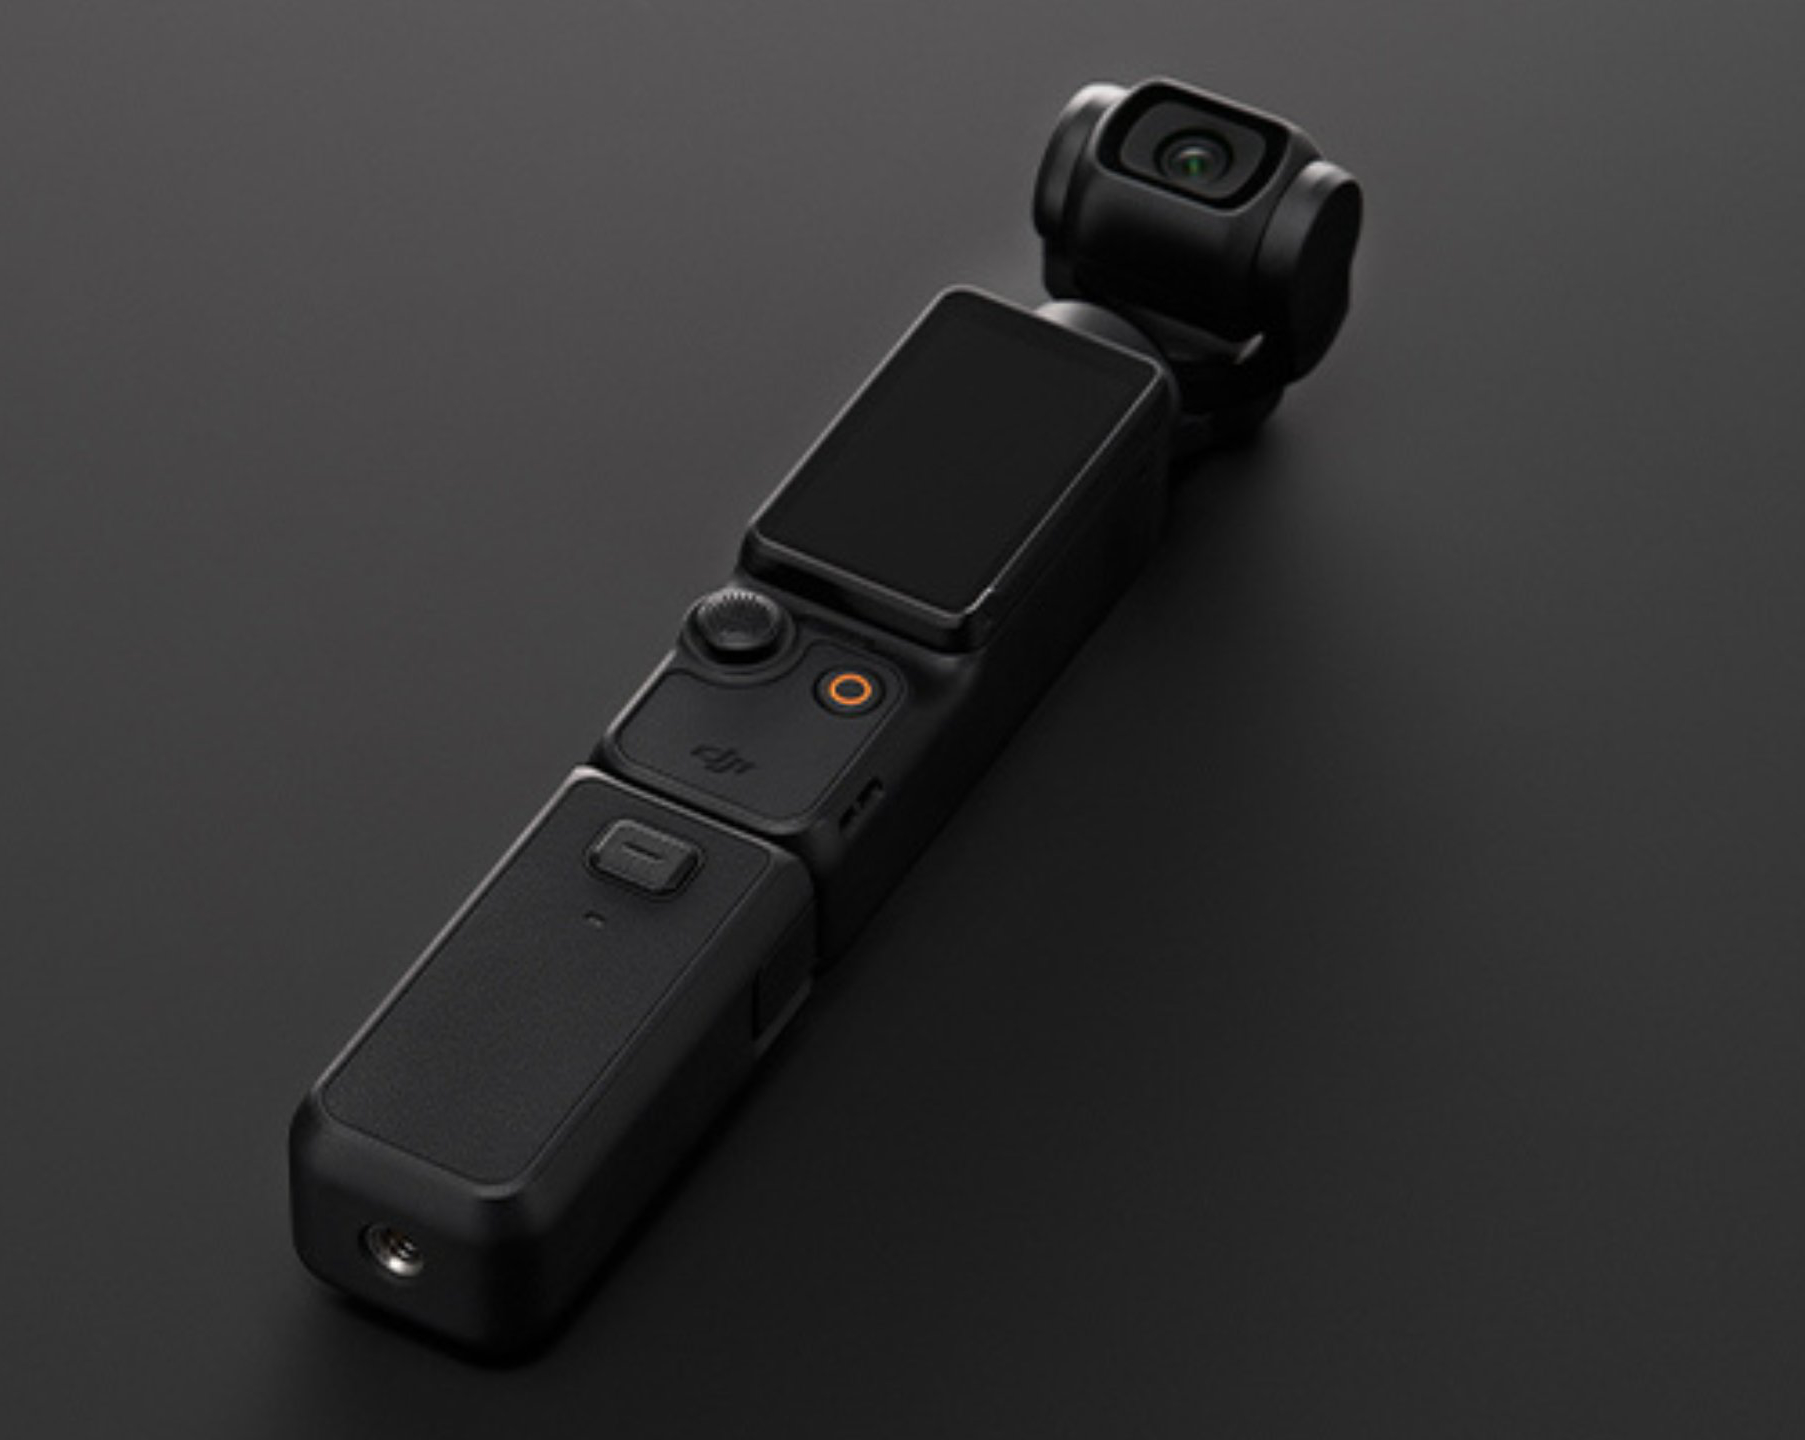 DJI Osmo Pocket 3 pricing, specifications and unboxing videos